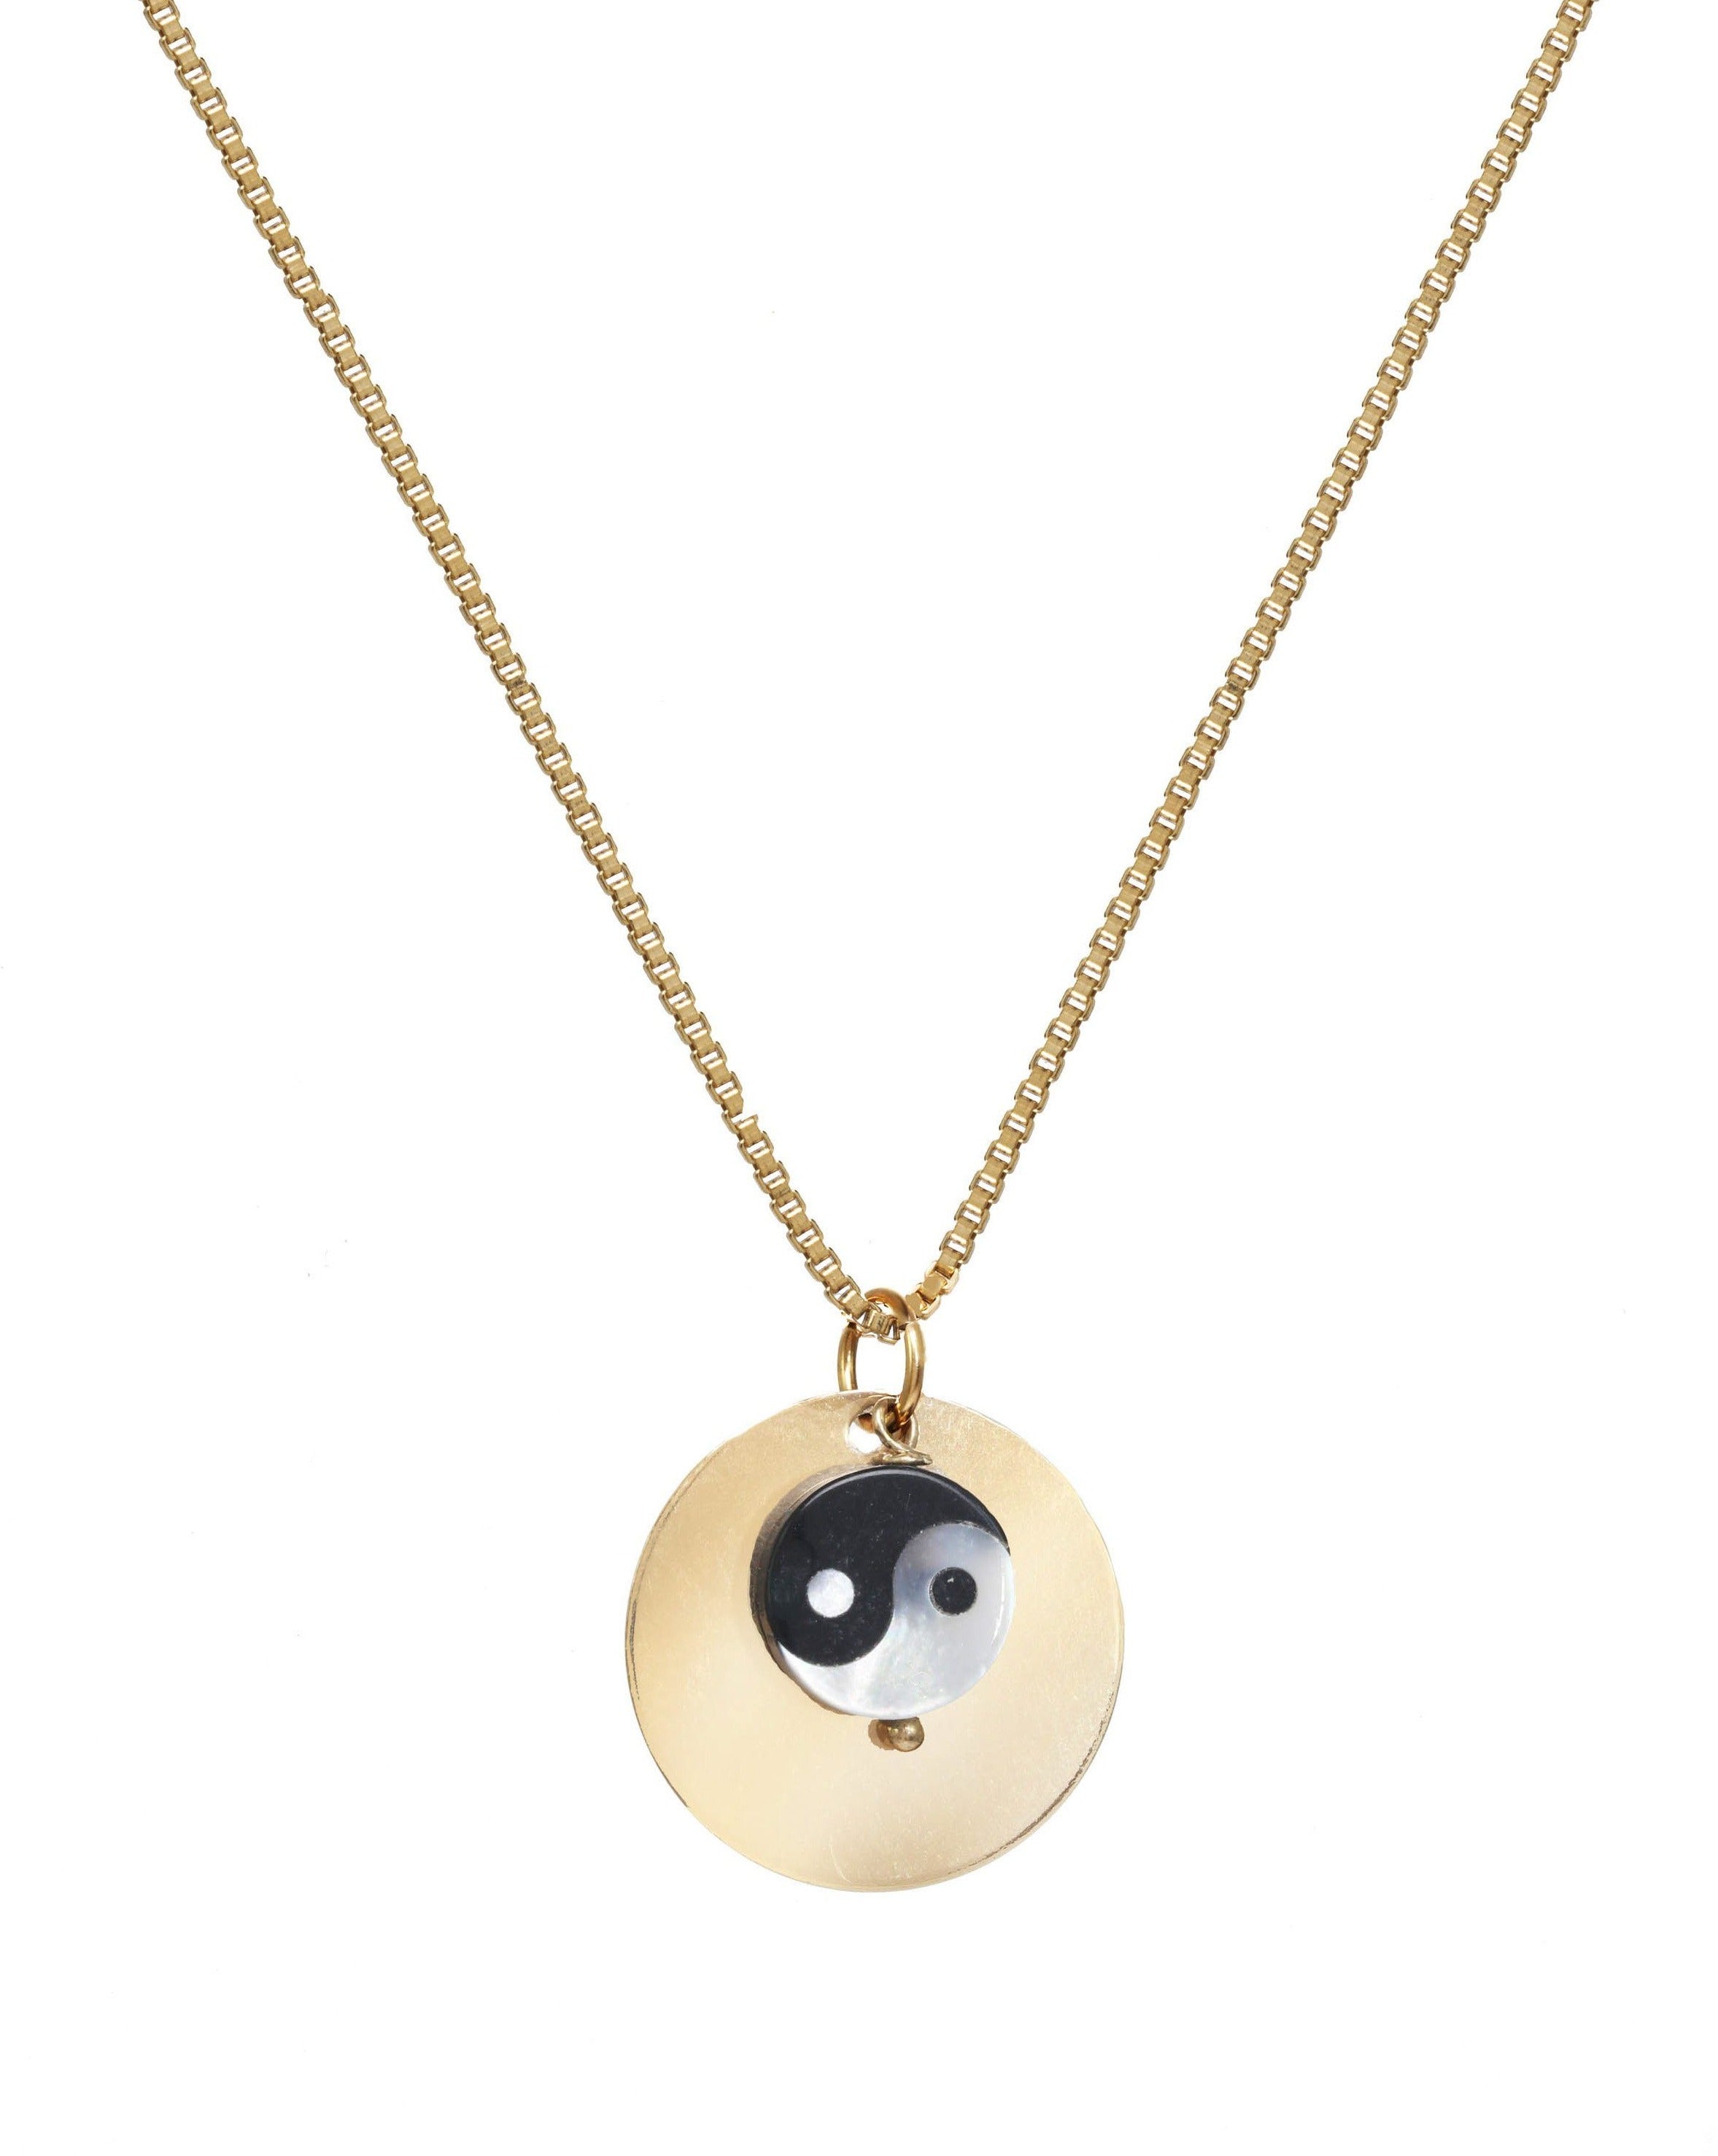 Yin Yang Medallion Necklace by KOZAKH. A 16 to 18 inch adjustable length, box chain necklace, crafted in 14K Gold Filled, featuring a hand carved Mother of pearl Yin Yang charm and a 16mm medallion.